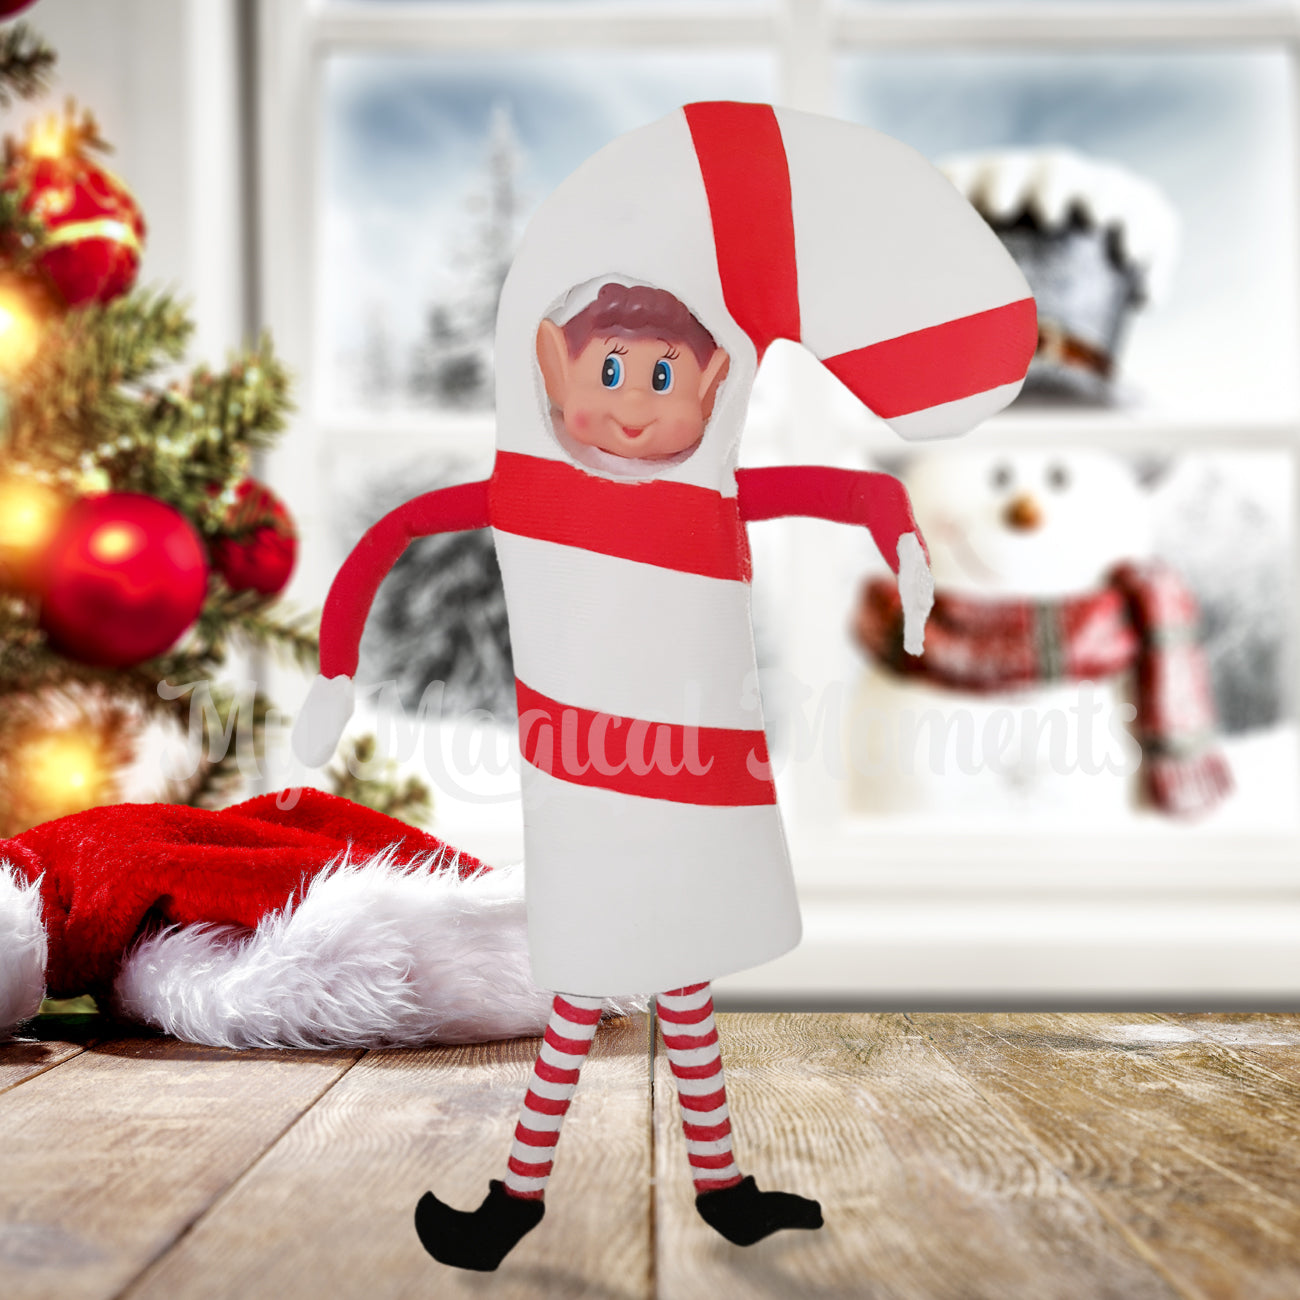 Elves Behavin Badly Dressed as a Candy Cane by A Christmas tree